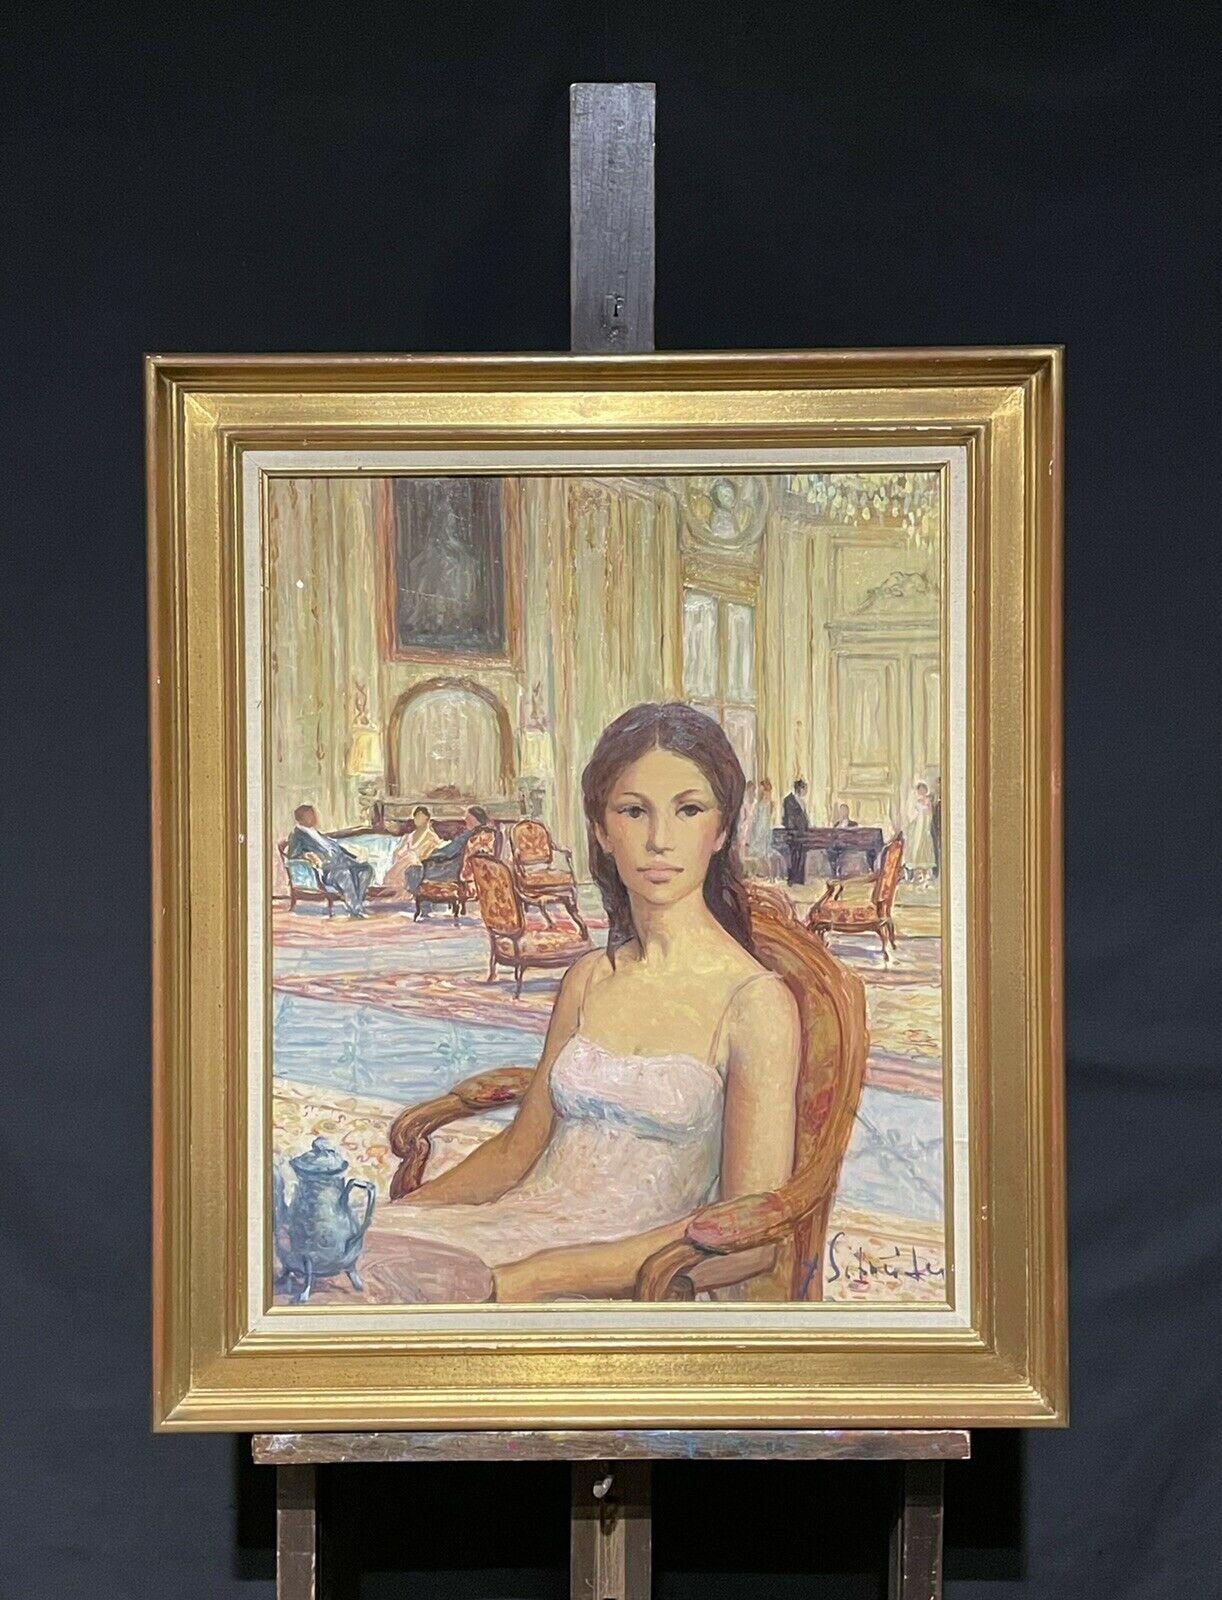 SIGNED FRENCH OIL - LADY SEATED IN LE MEURICE HOTEL PARIS TEA SALON INTERIOR - Painting by French signed